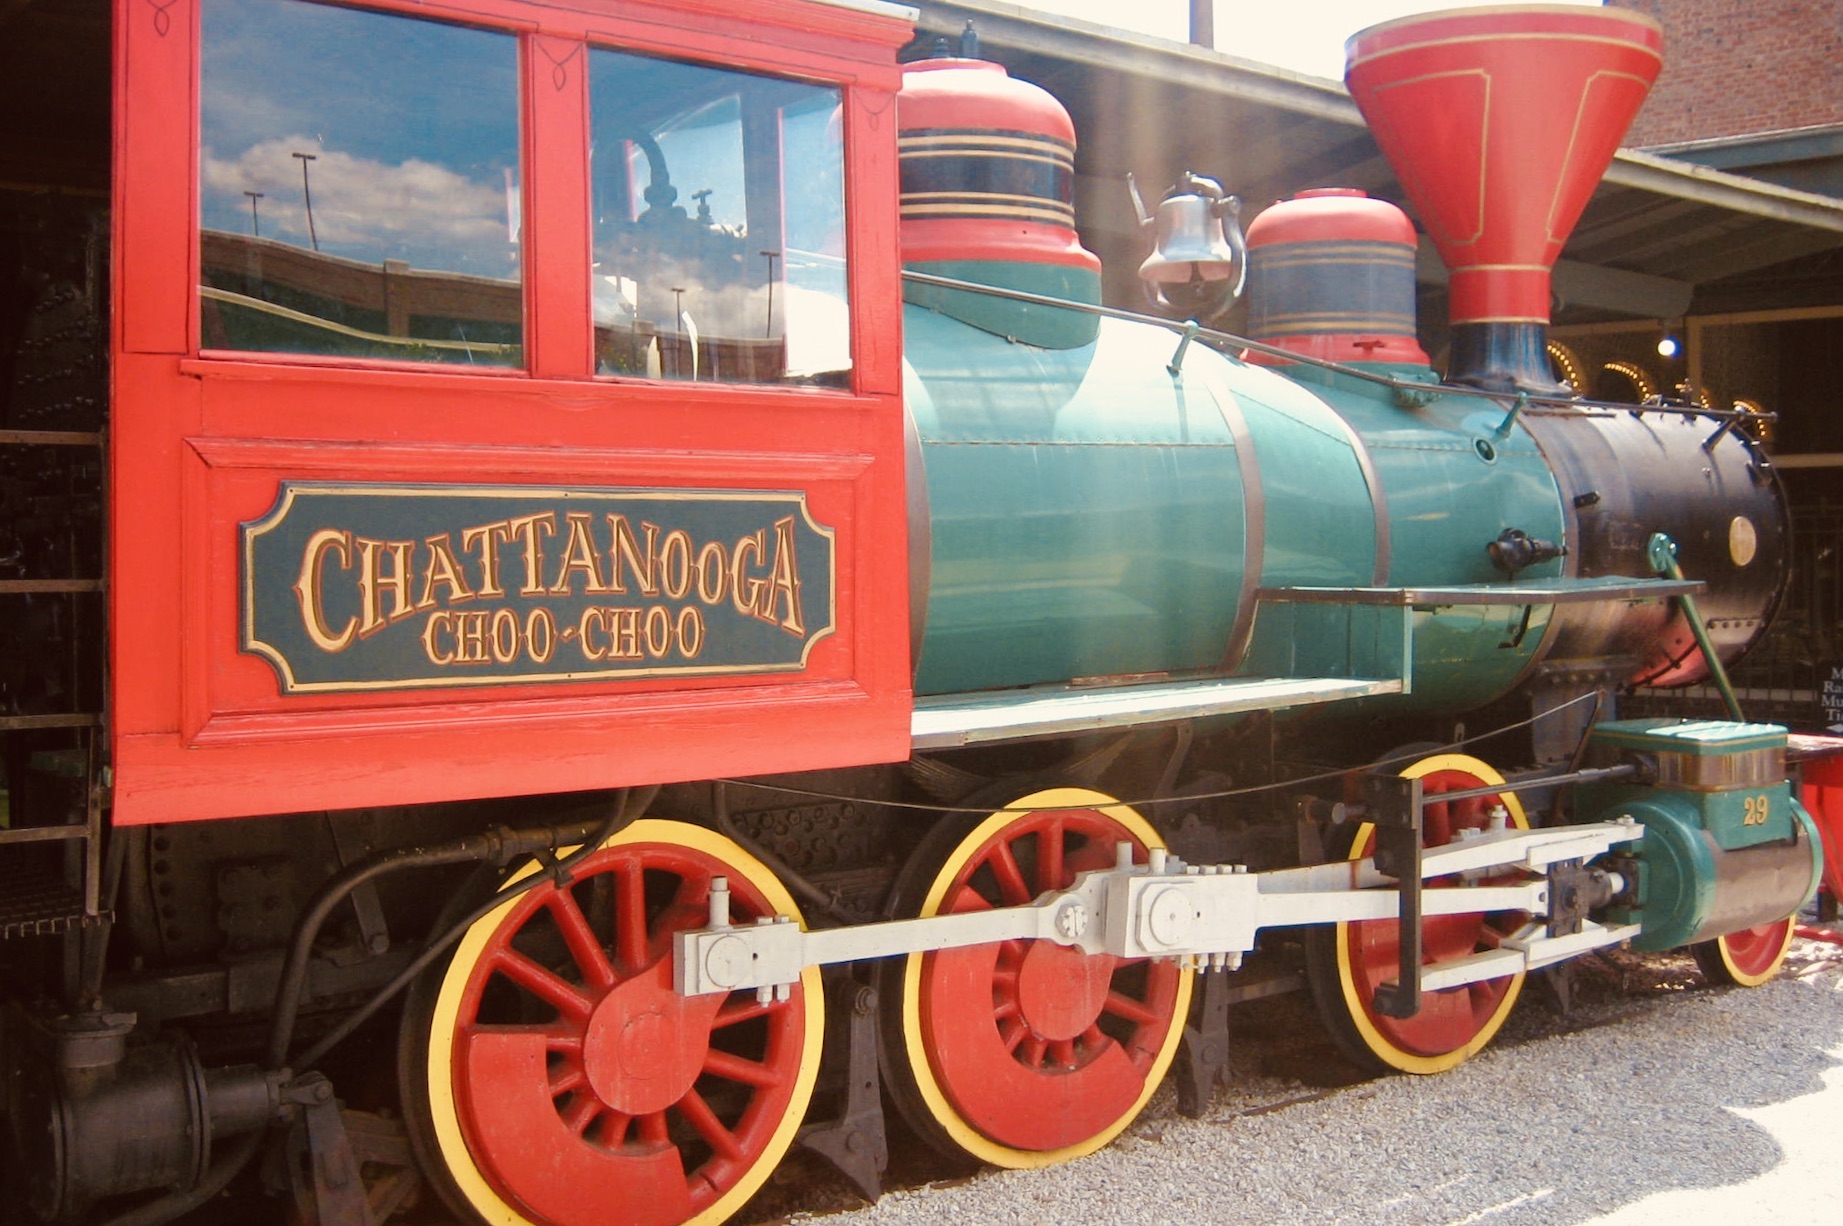 The Chattanooga Choo Choo at the former Terminal Station